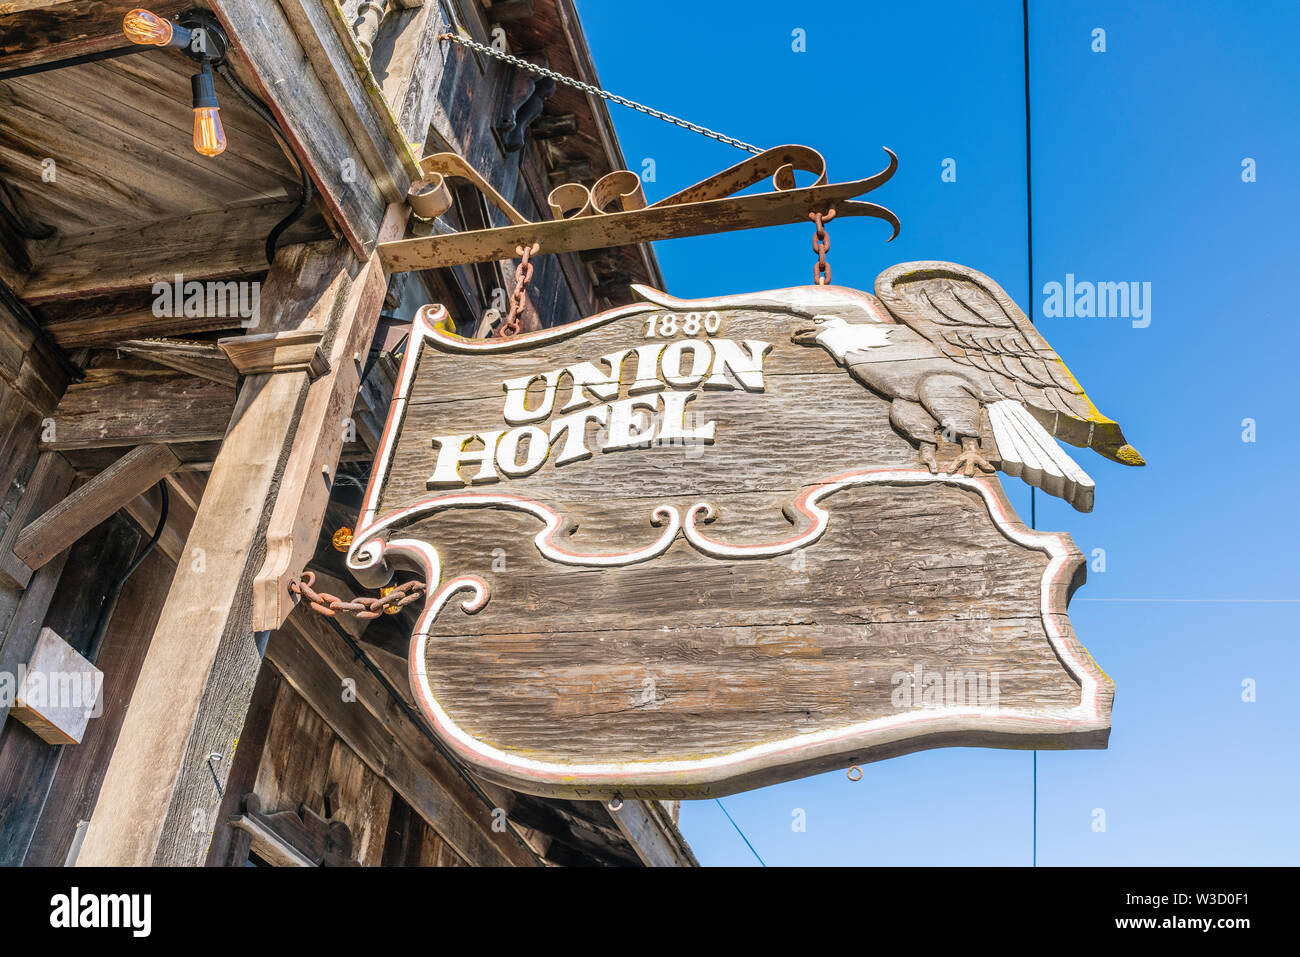 An old carved wooden sign for the historic Union Hotel in Los Alamos, California hangs from the front of the hotel over the wooden sidewalk. Stock Photo